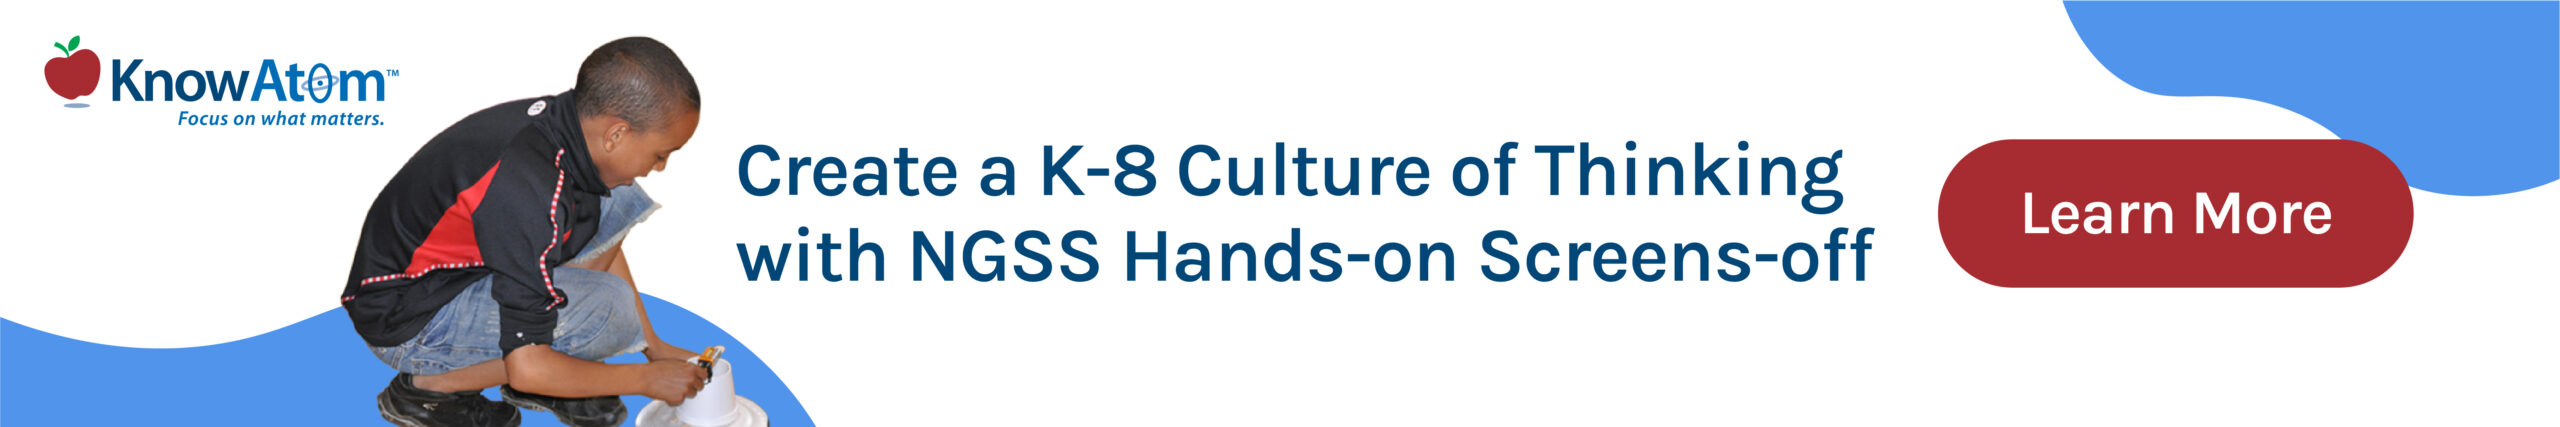 Create a K-8 Culture of Thinking with NGSS Hands-on Screens-off Learn More